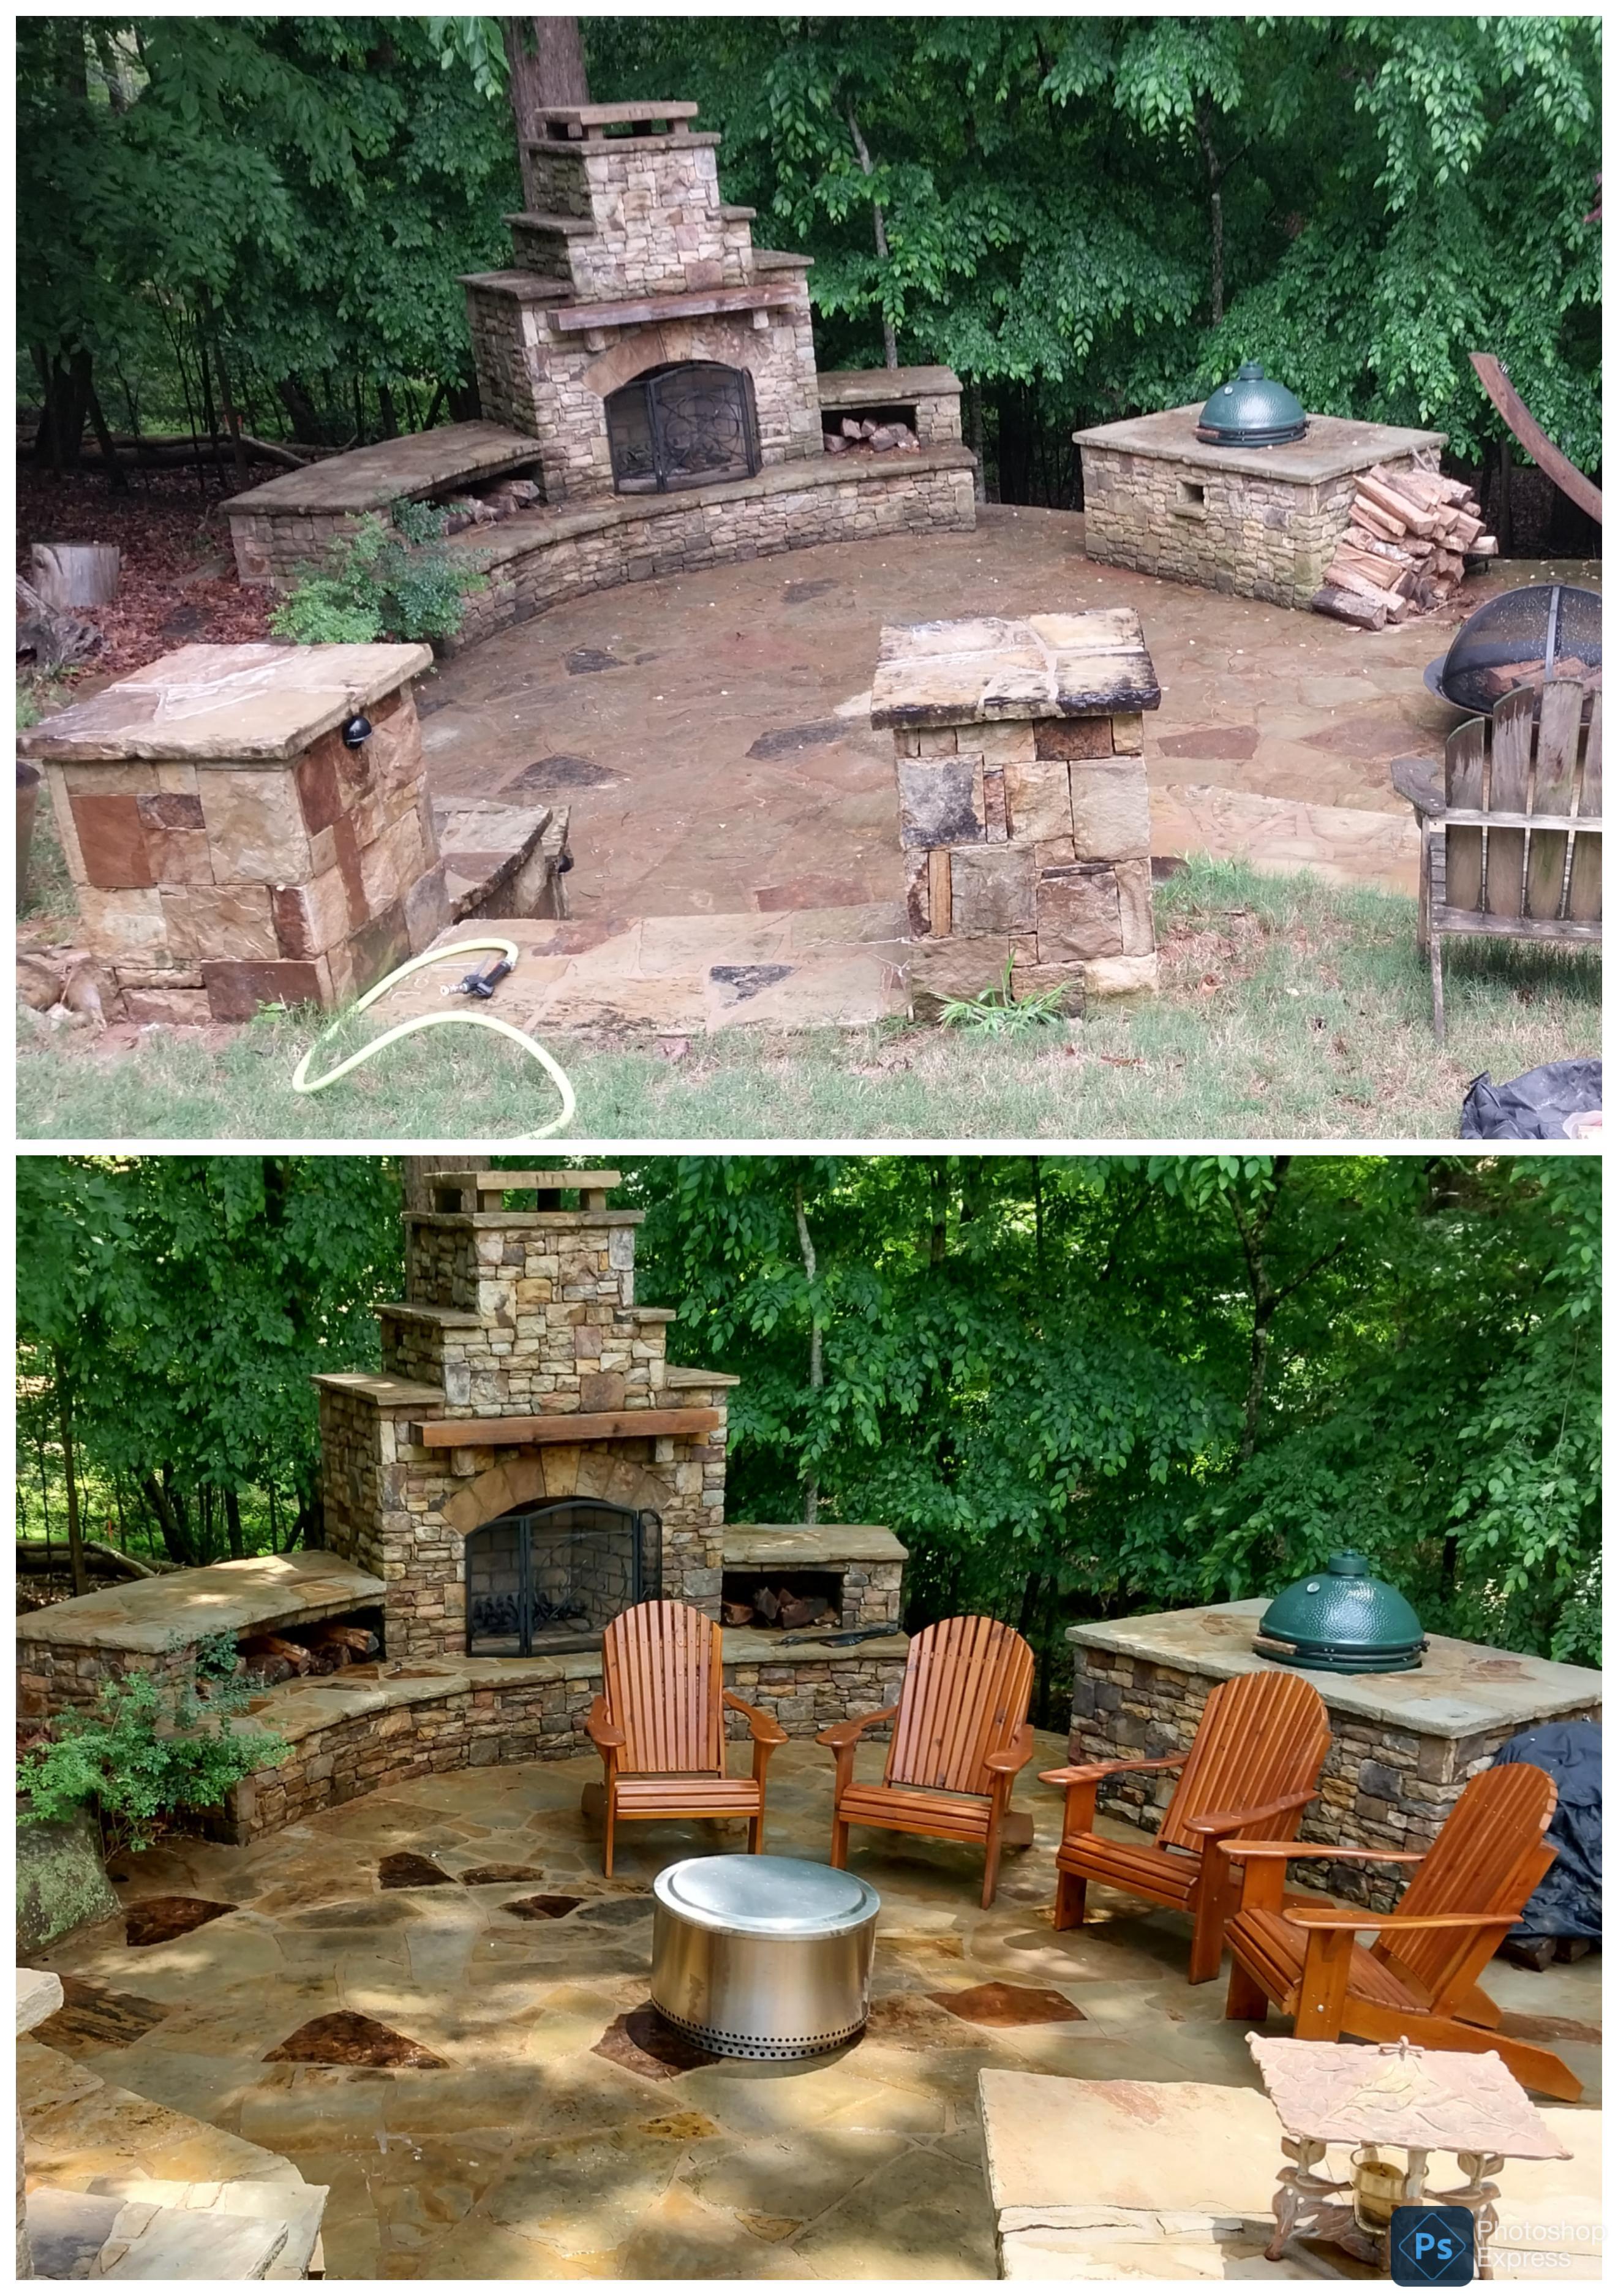 STONE PATIO CLEANING JOB IN GAINESVILLE, GA